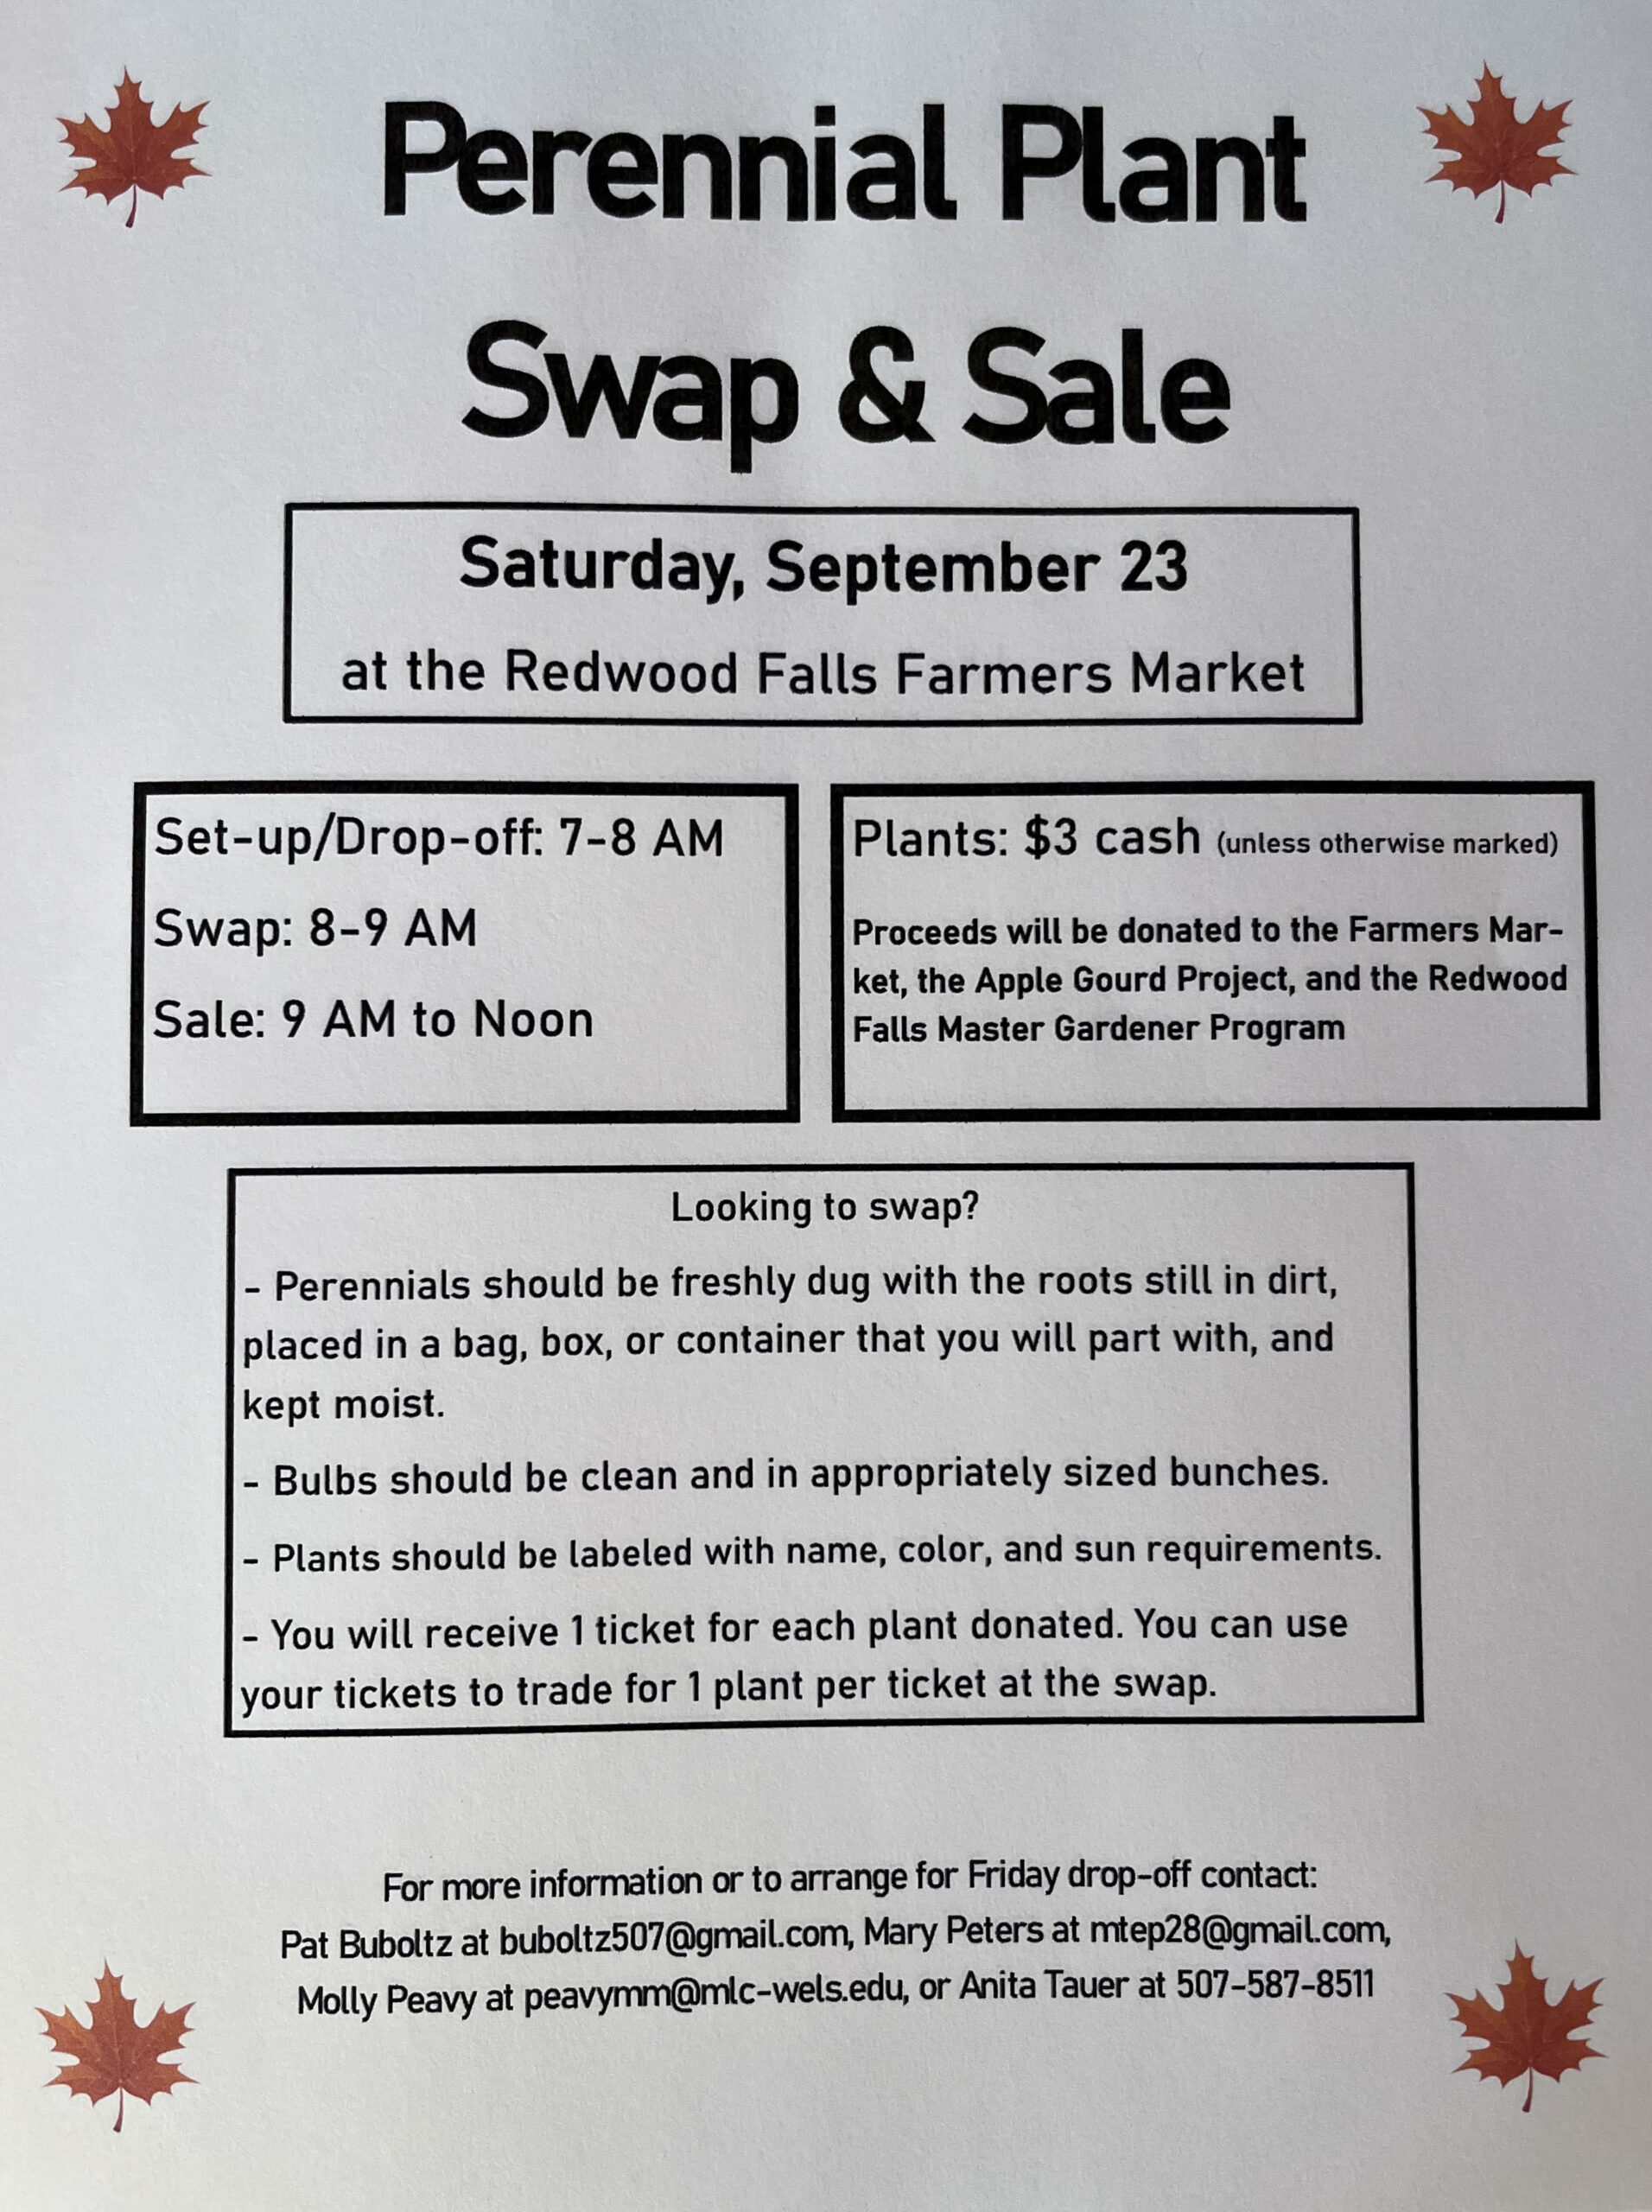 <h1 class="tribe-events-single-event-title">Perennial Plant Swap & Sale</h1>